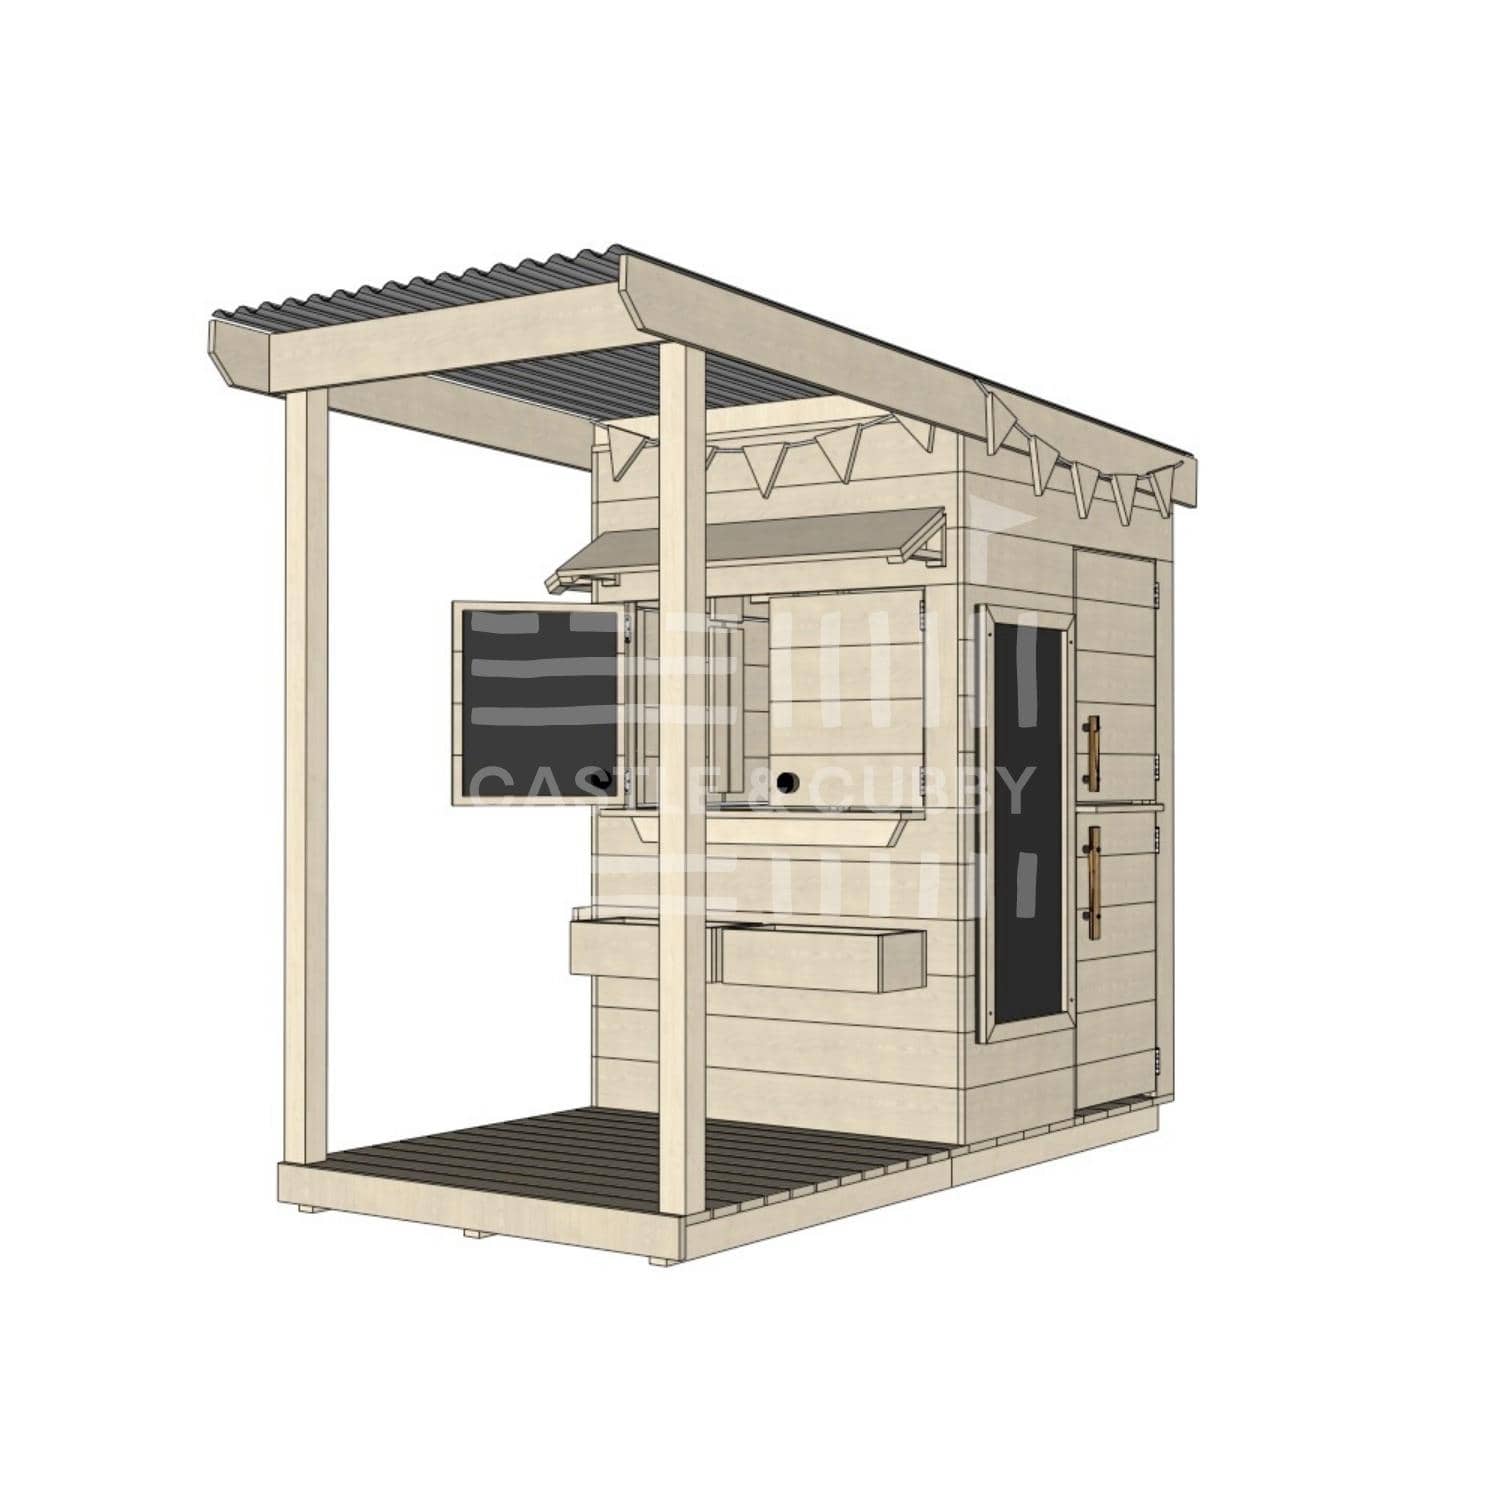 Pine timber extended height house with front verandah and deck for family gardens little square size with accessories